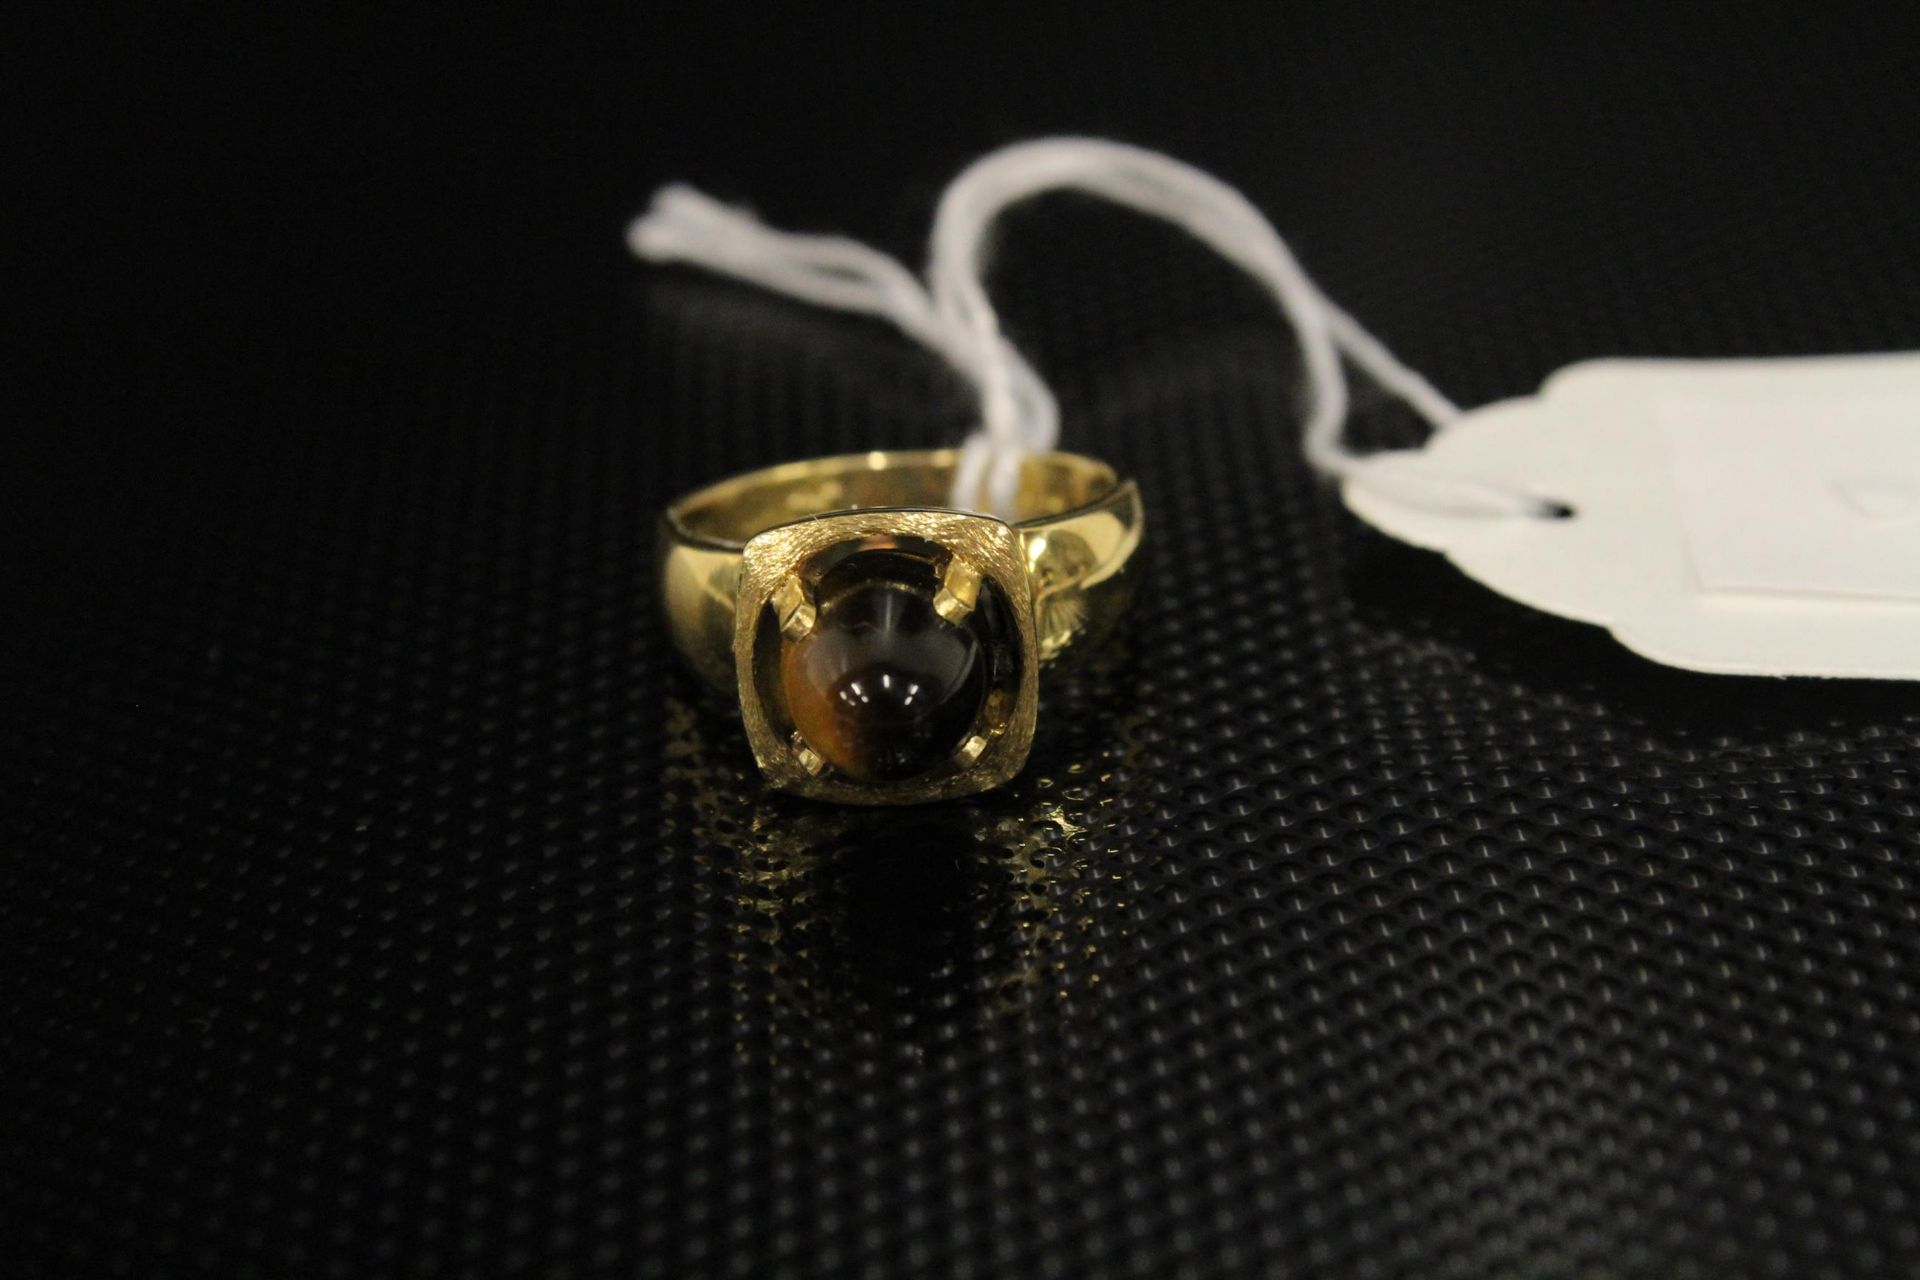 An 18ct Gold Gold Dress Ring with fancy stone size Q, cased. (Est. £70 - £100) - Image 2 of 5